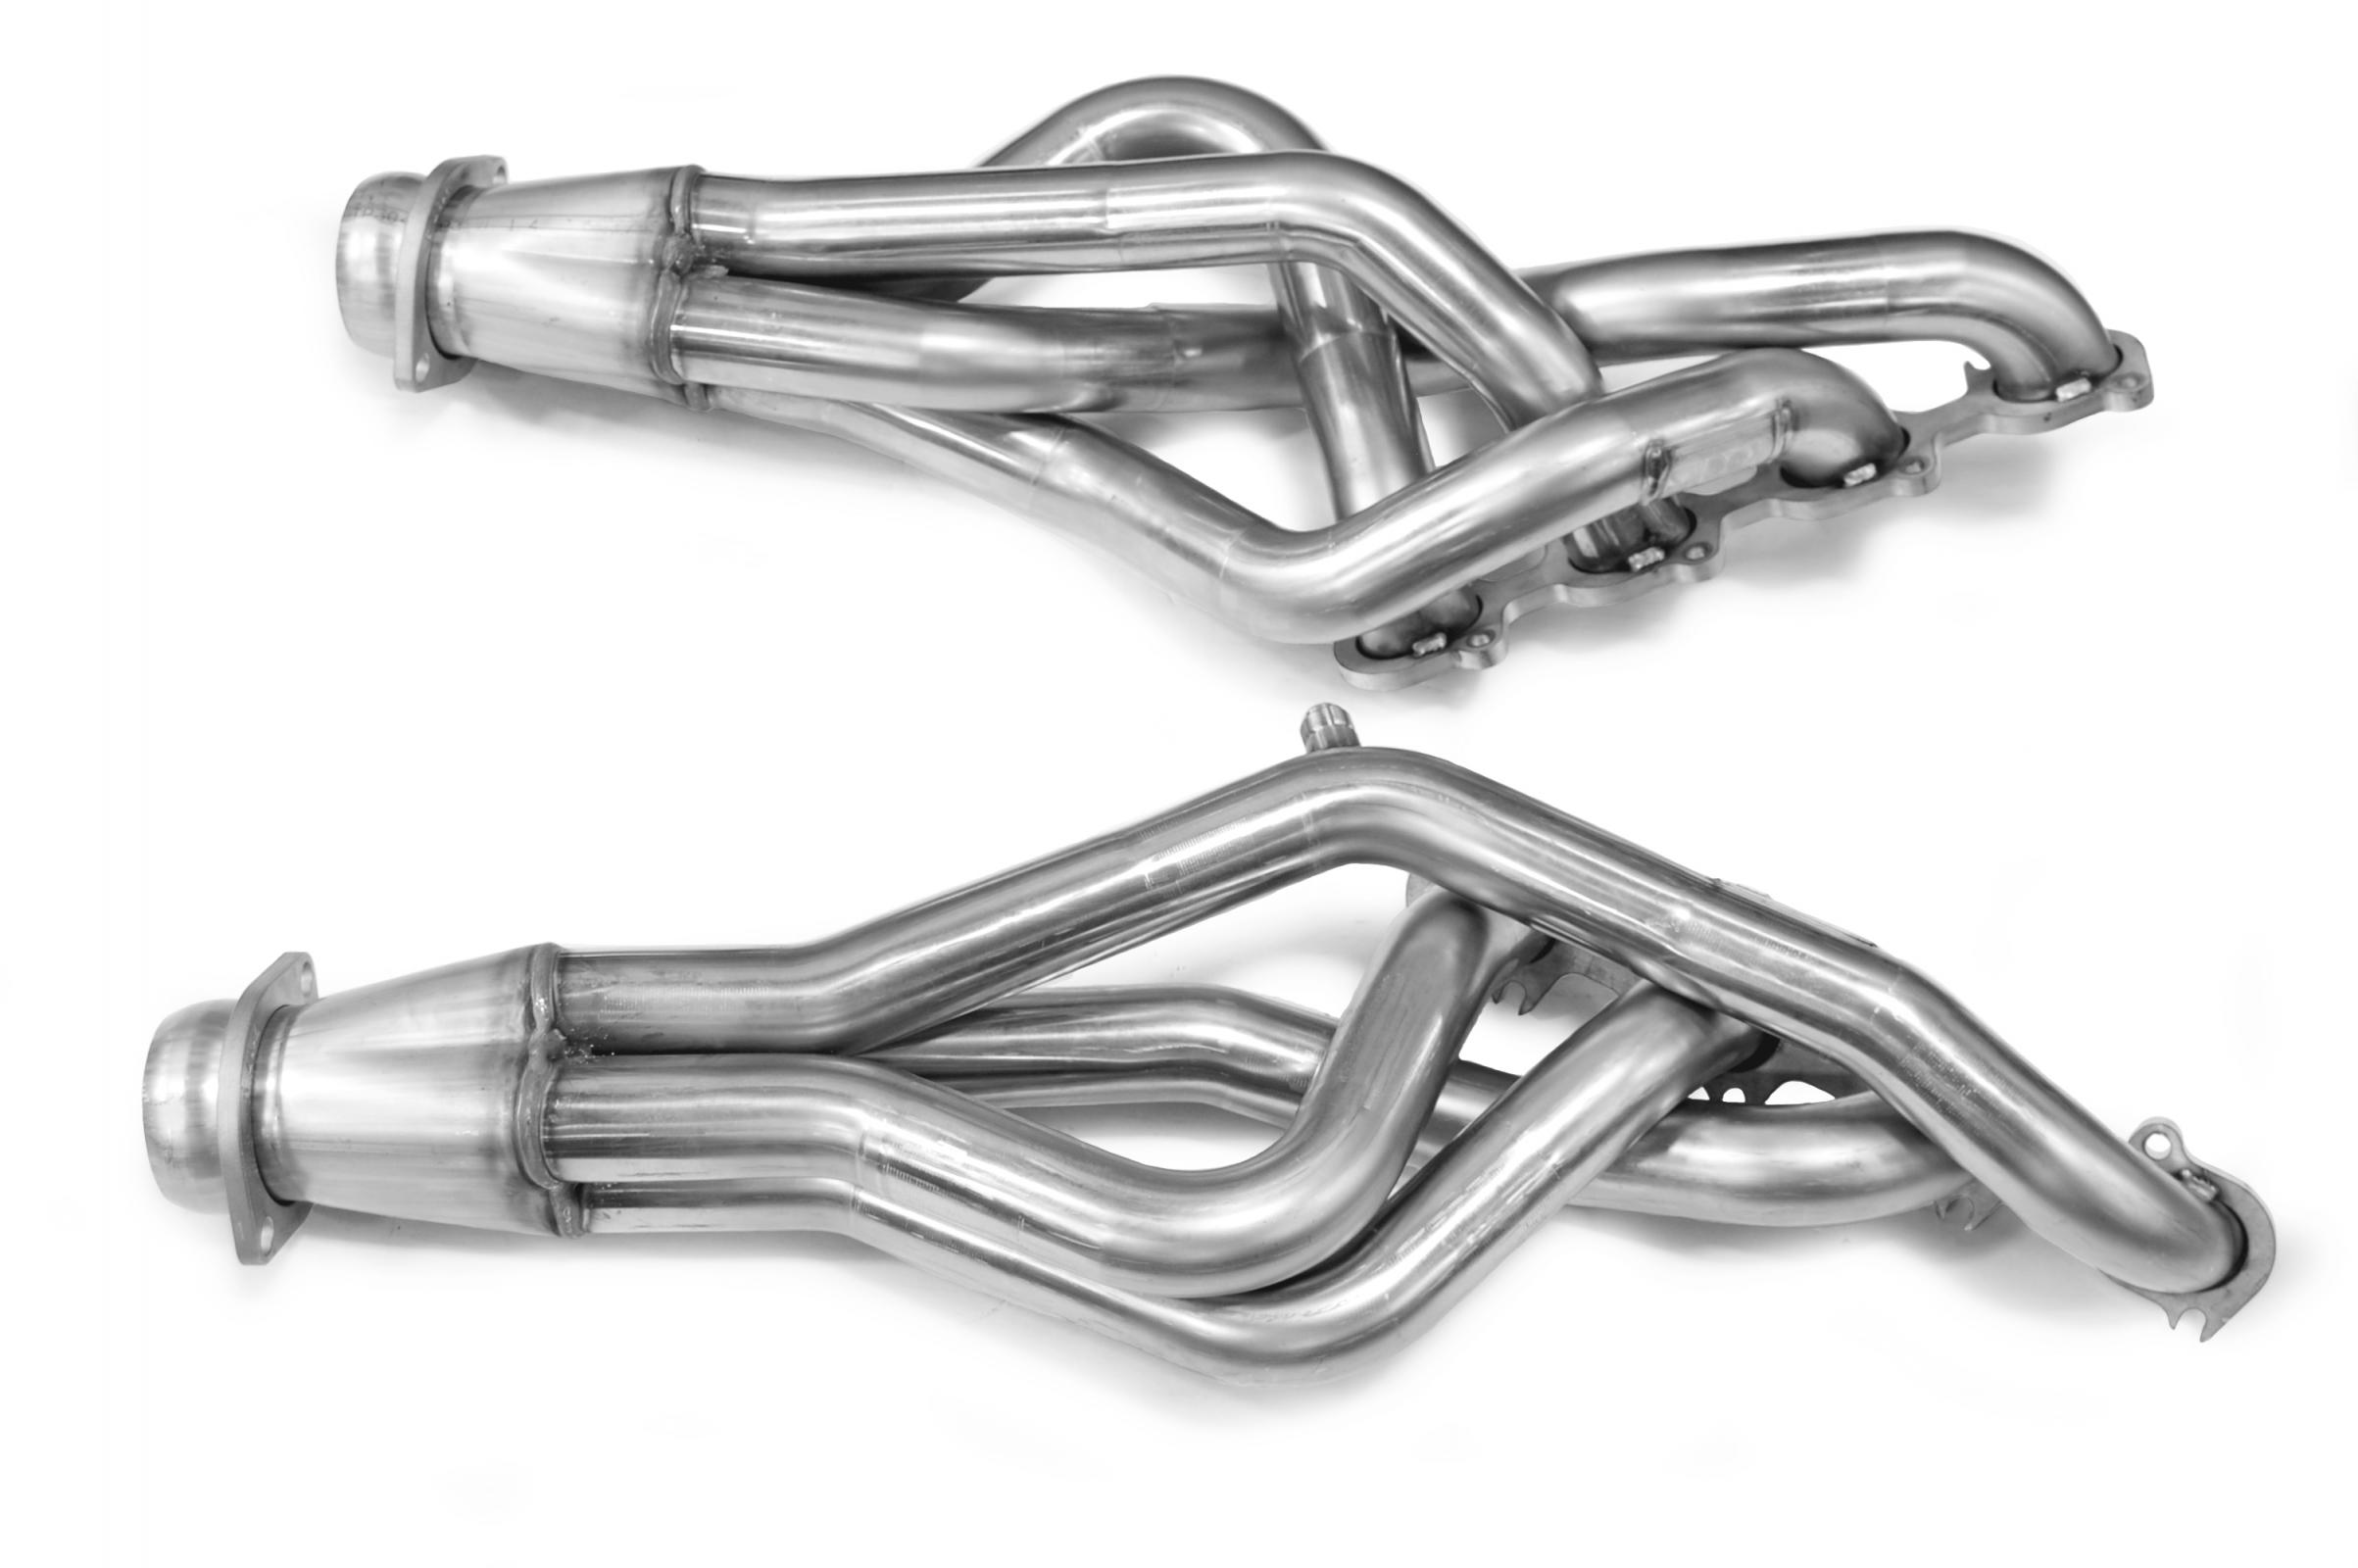 Stainless Steel Headers 1.875 x 3" Collector Long Tube Incl. 1 Pr. 12" O2 Extension Harness